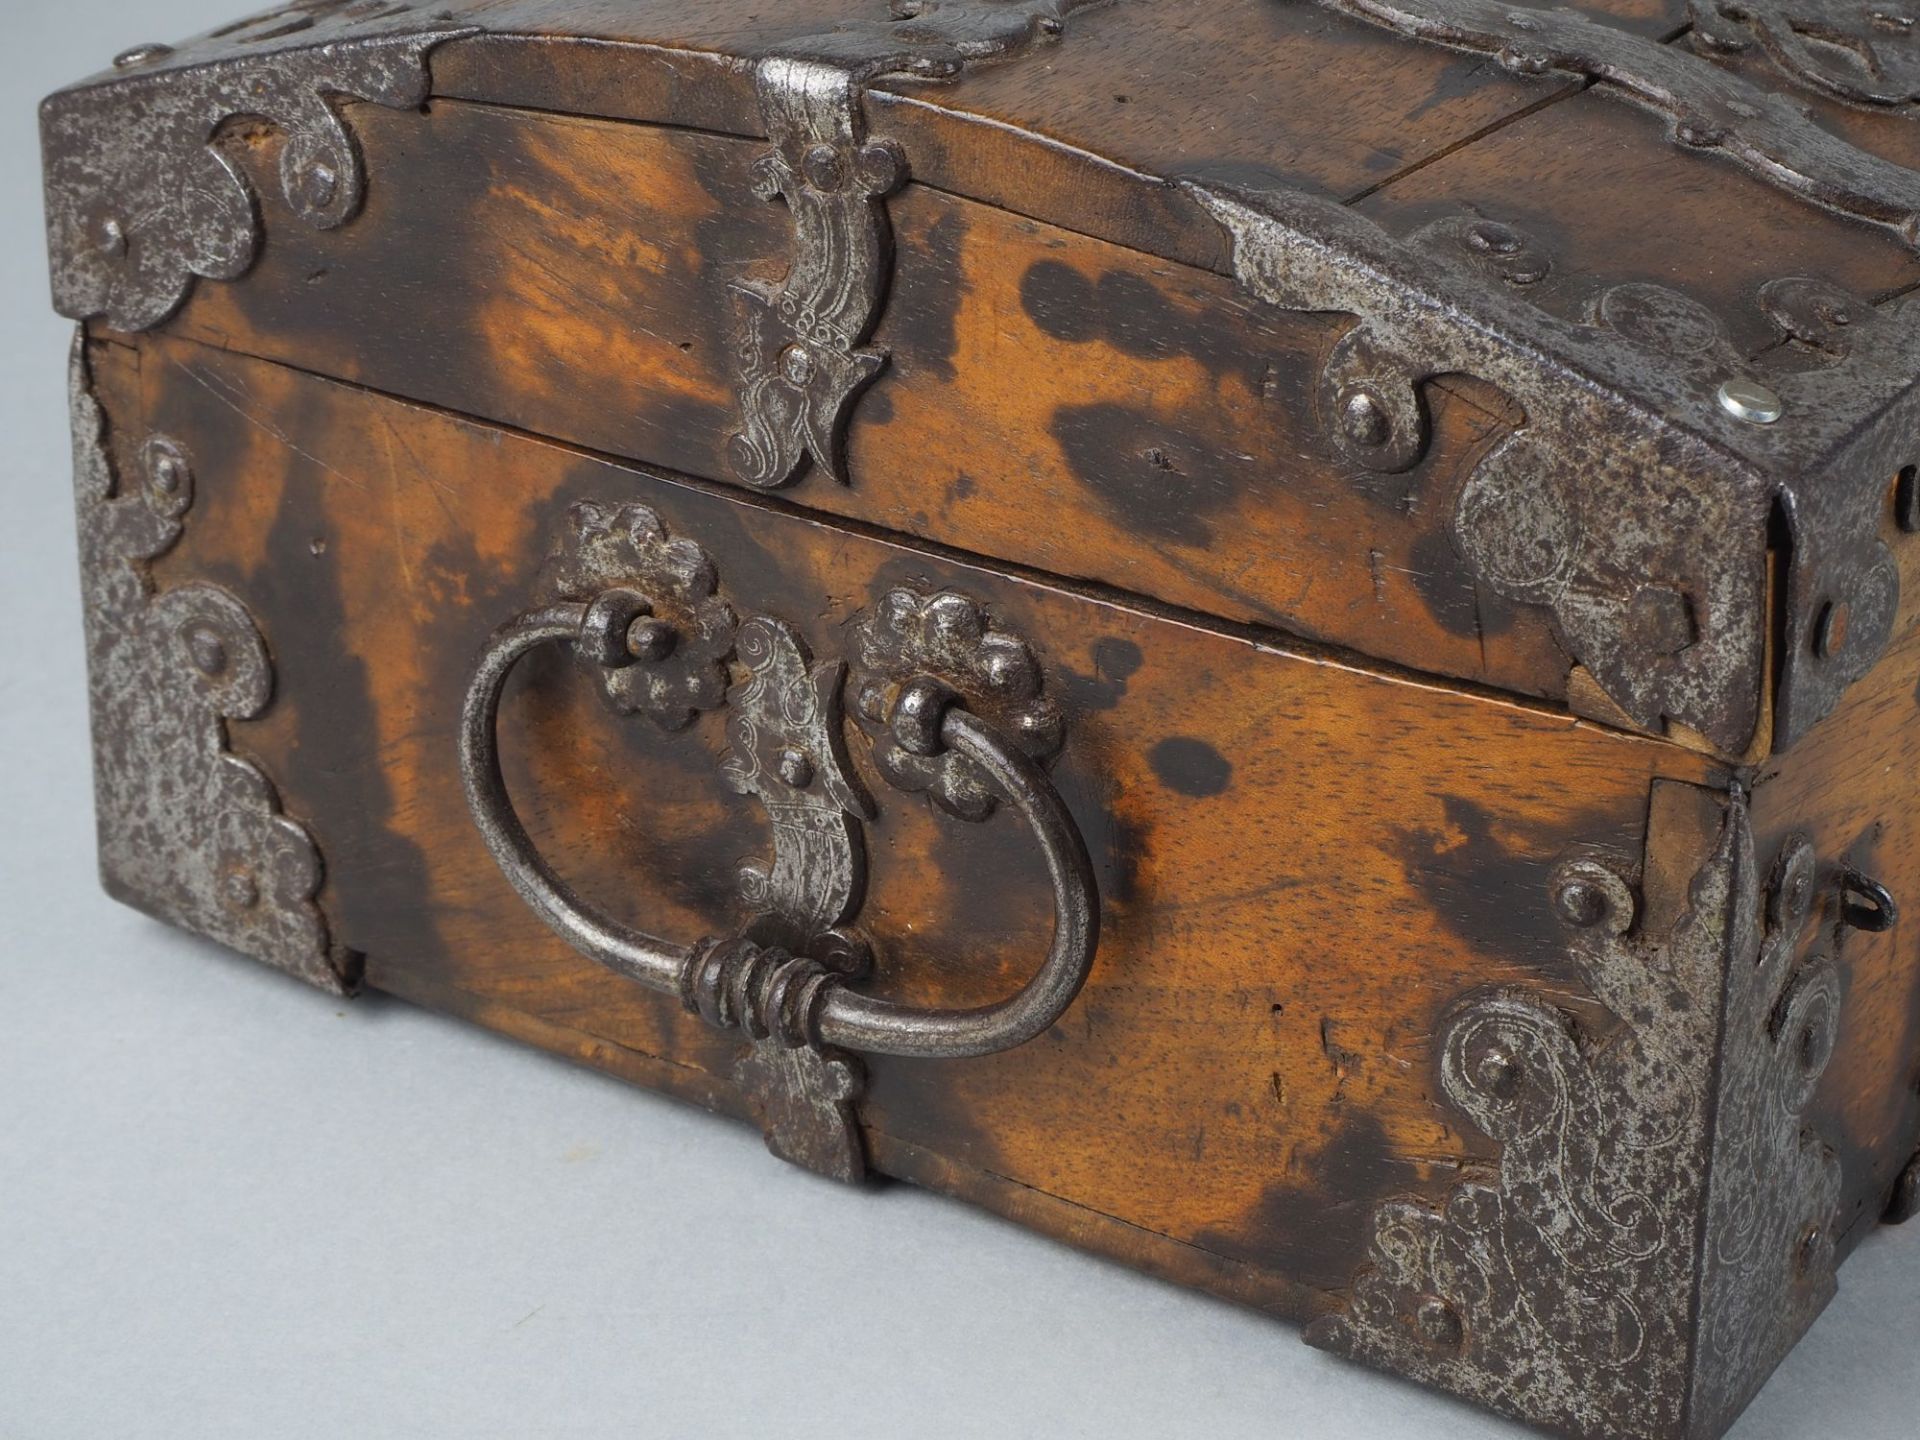 Guild chest (Kandler guild), 18th century. - Image 7 of 7